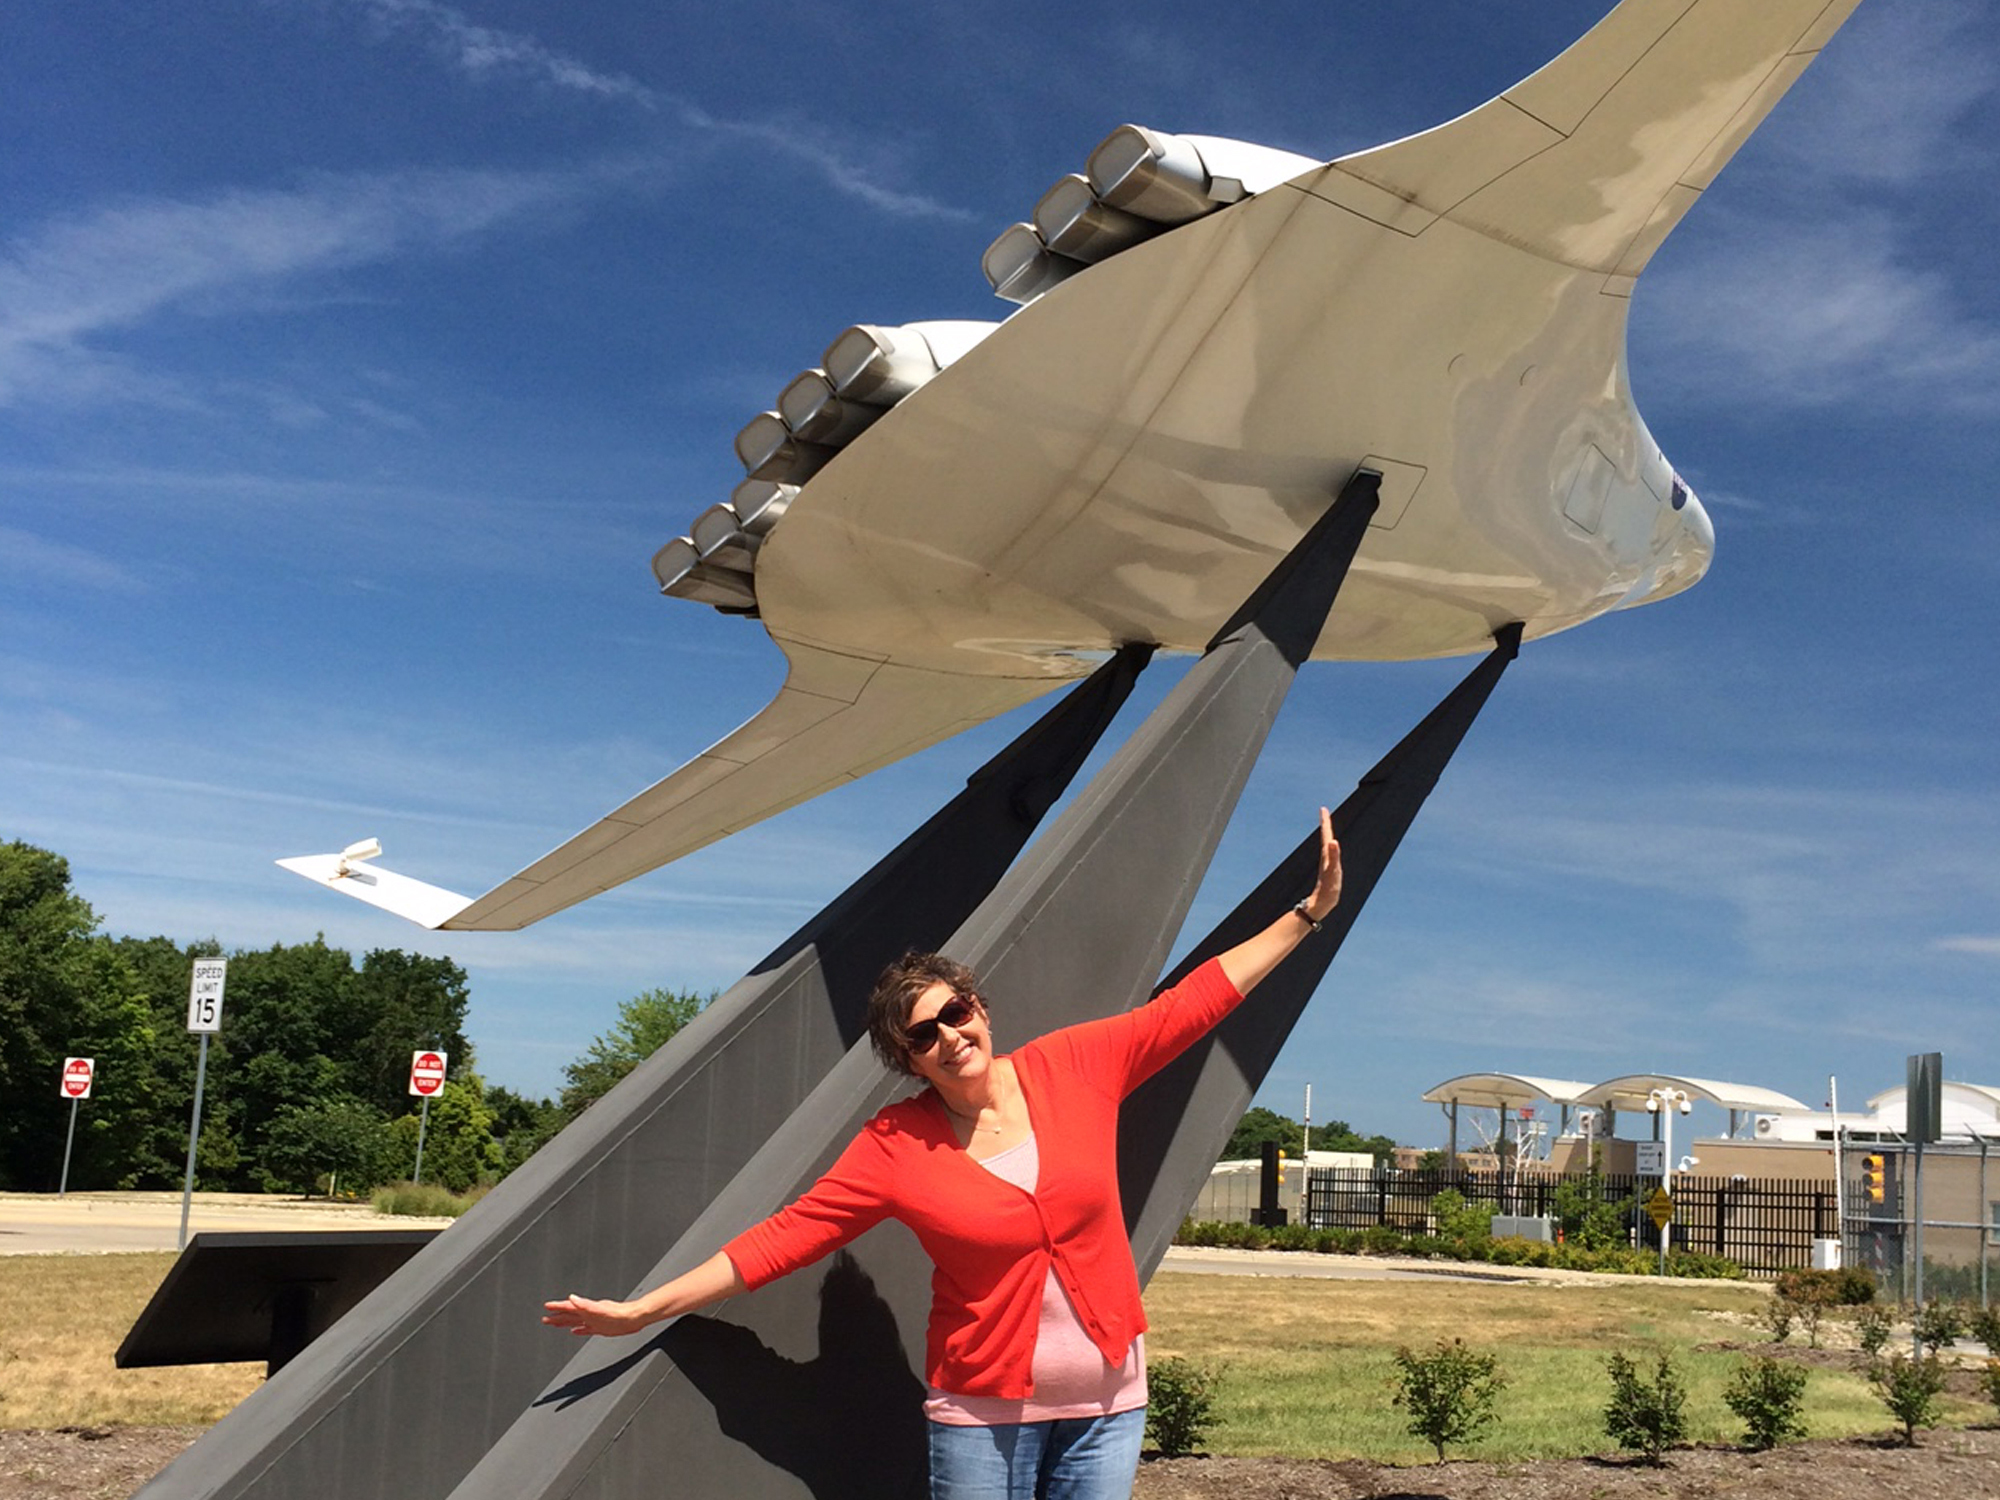 NASA employee near an airplane monument spreading her arms out, "Spread Your Wings".